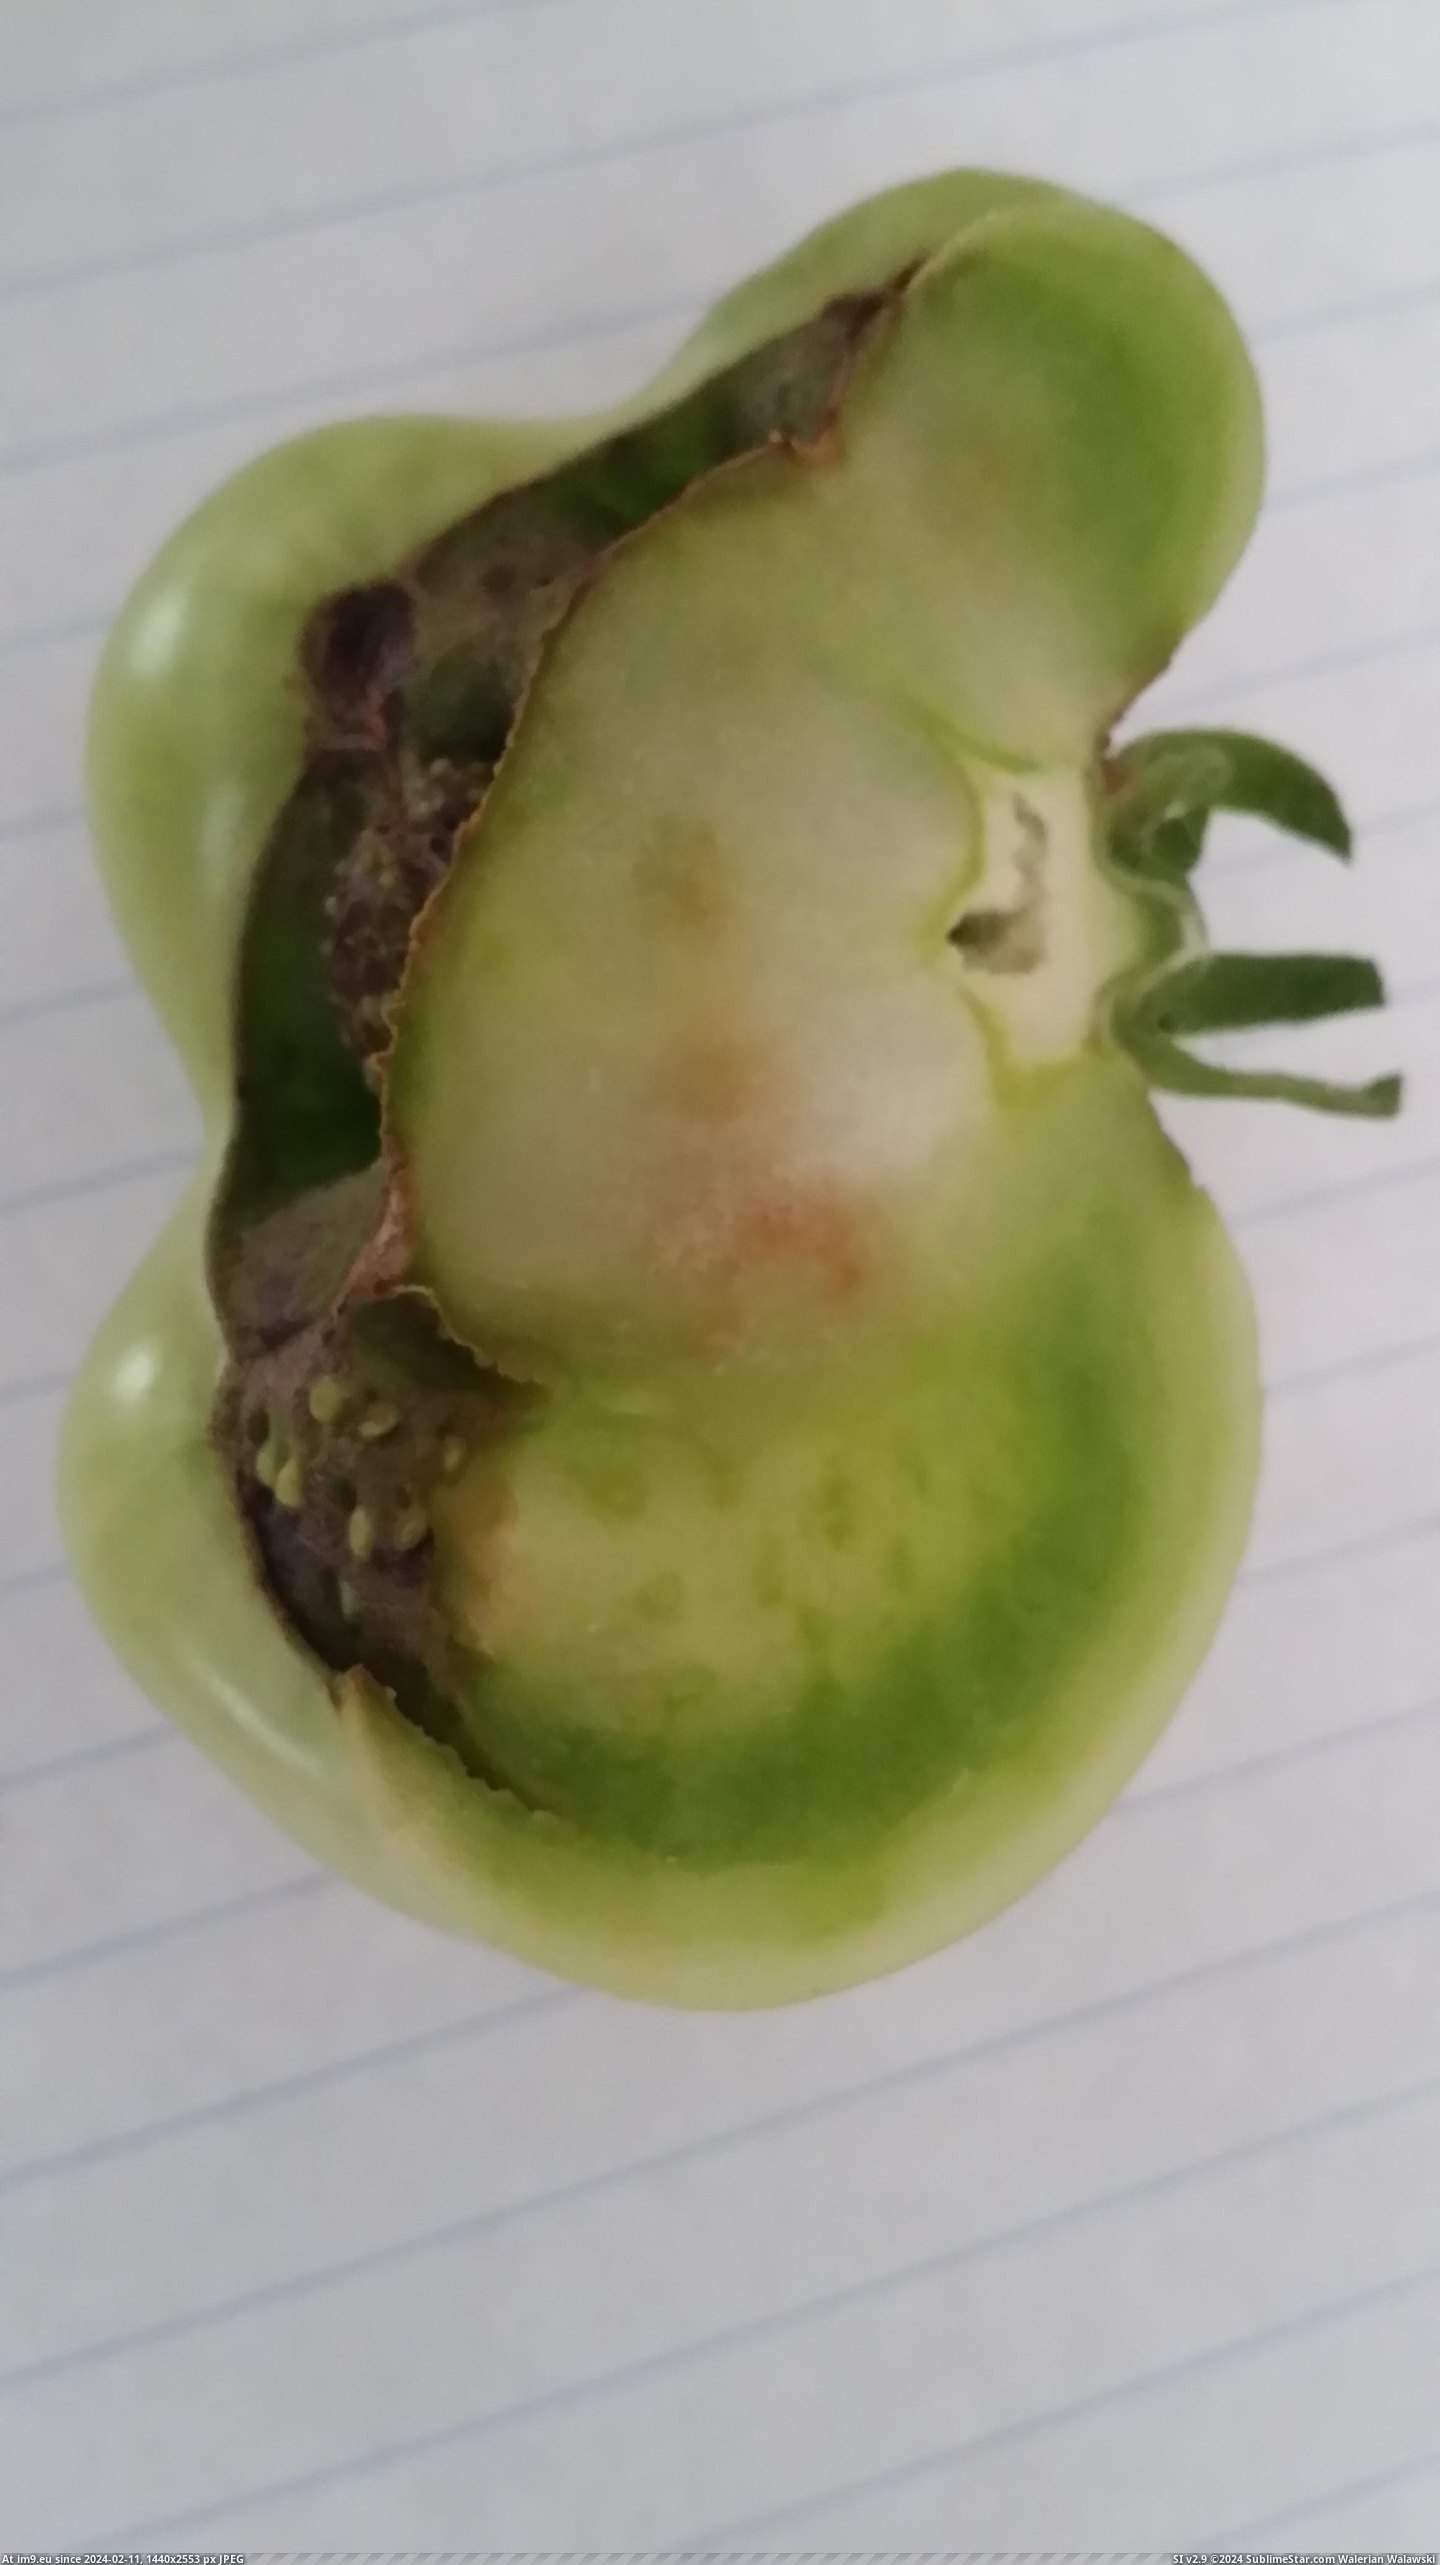 #Created #Strawberry #Hybrid #Fused #Tomato #Seeds [Mildlyinteresting] Our tomato seeds fused with our strawberry seeds and created a hybrid 1 Pic. (Изображение из альбом My r/MILDLYINTERESTING favs))